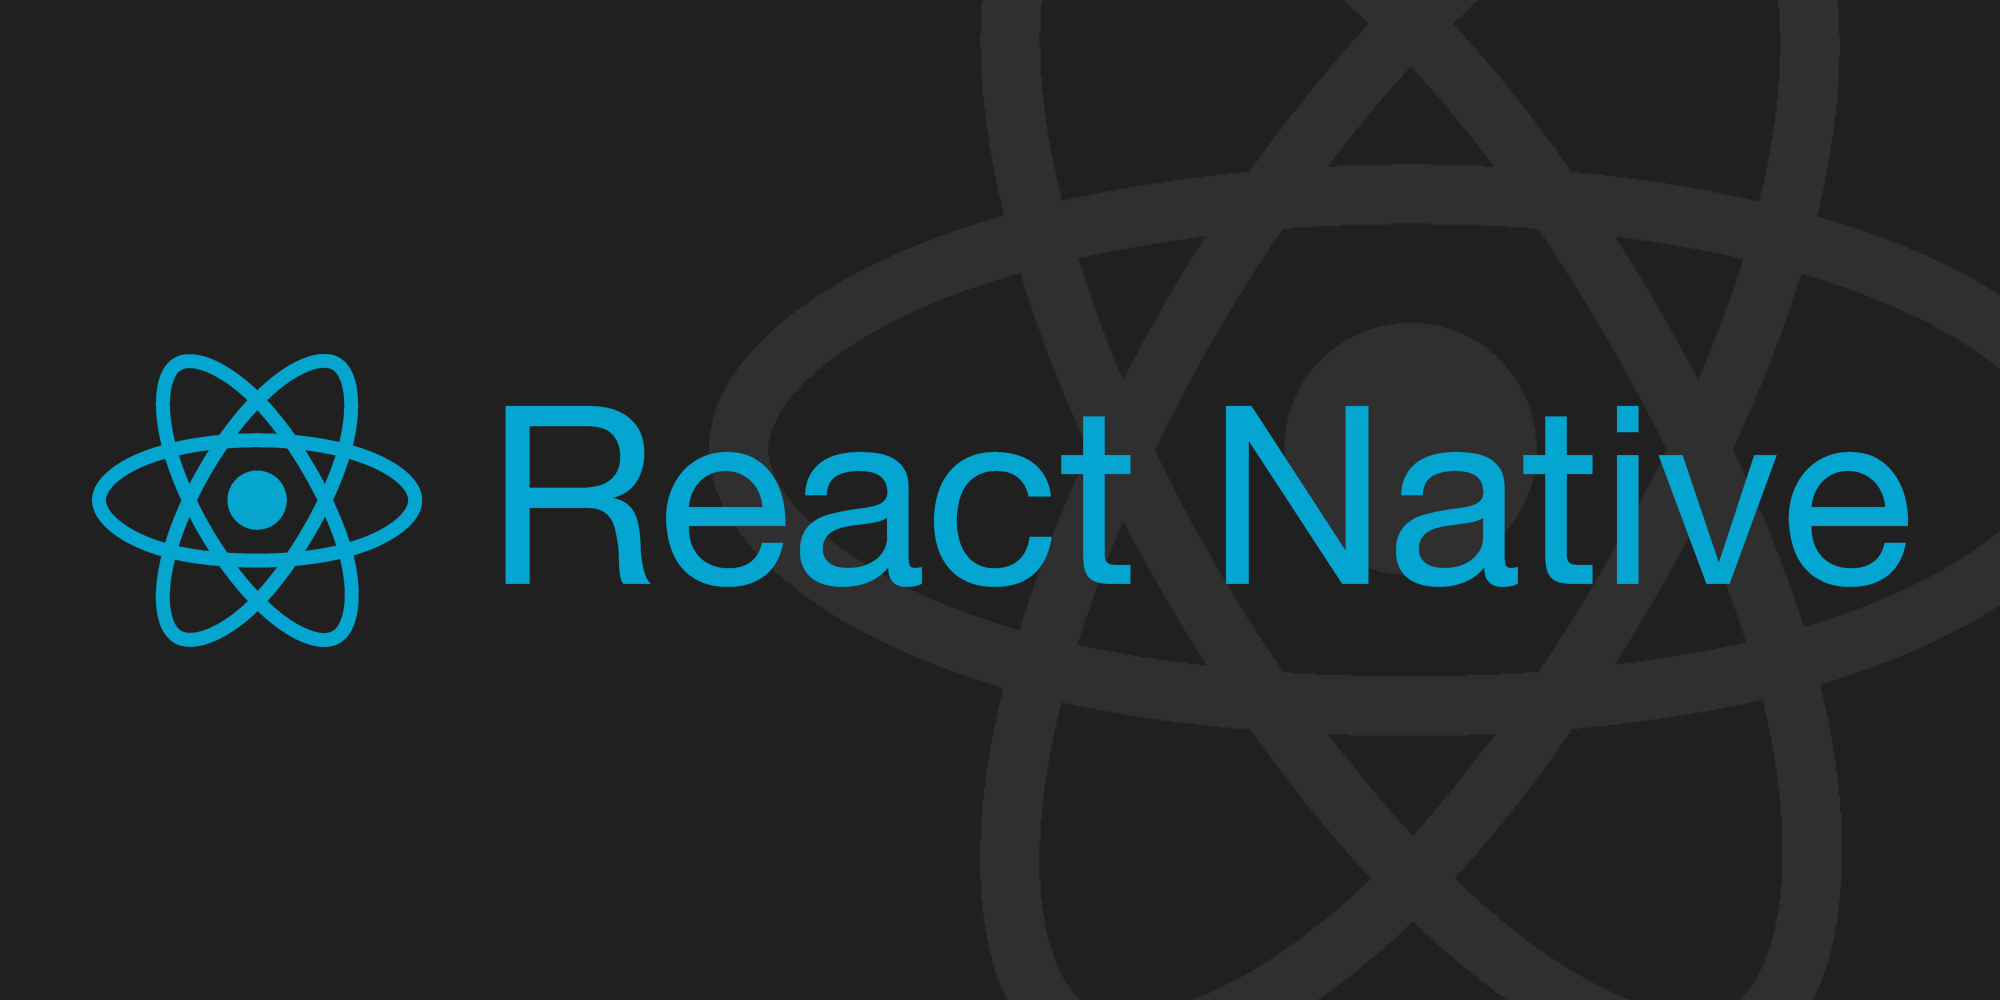 React Native is the Future of Mobile at Shopify